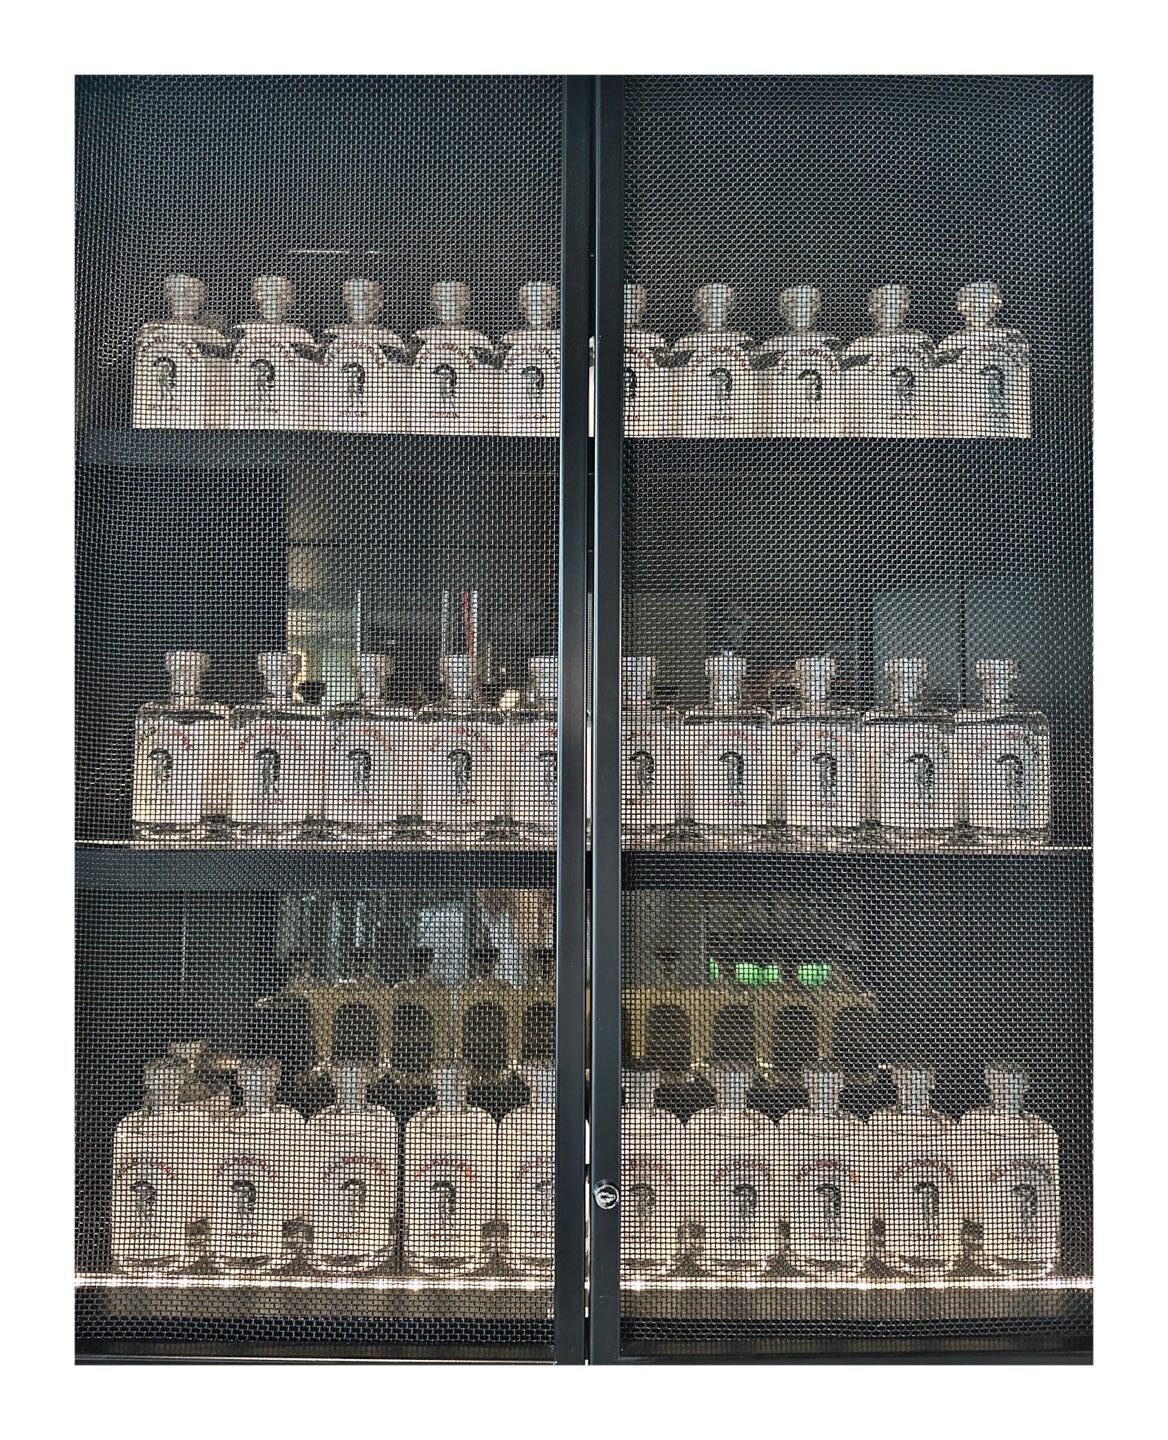 99 bottles of gin on the wall&hellip;99 bottles of gin